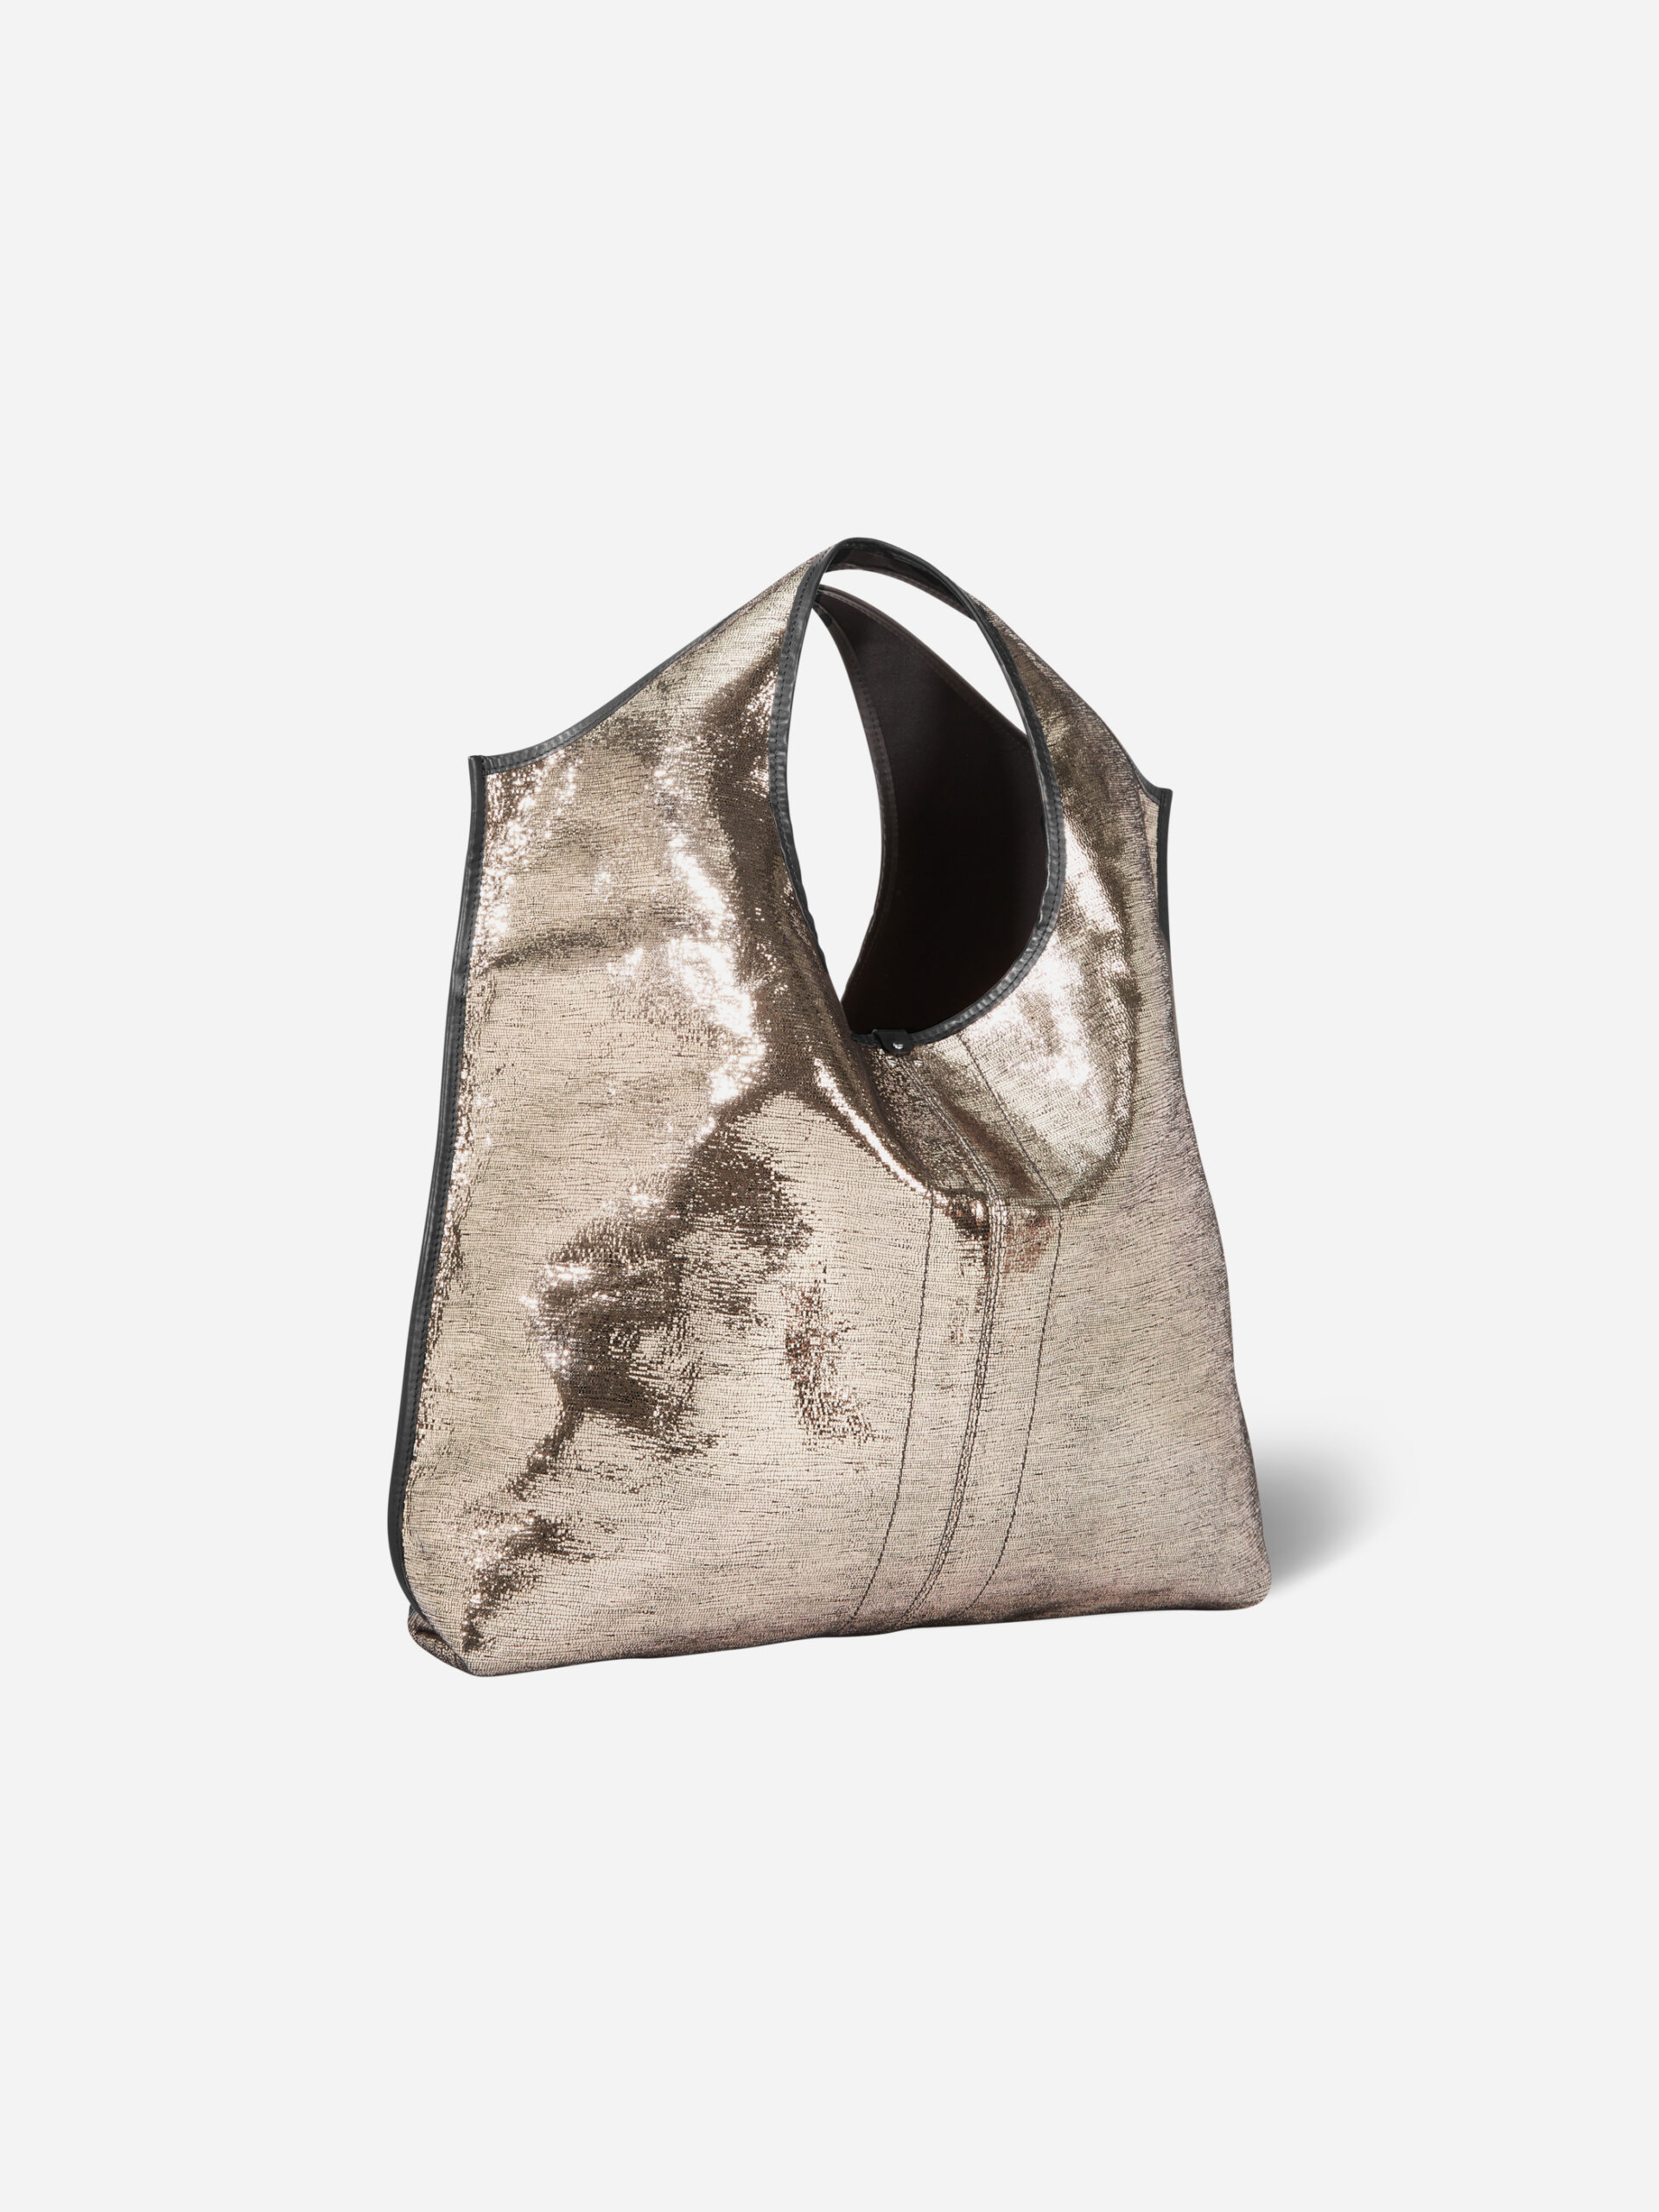 43PACOCH_Lame-Champagne_leather-soft-tote-bag-jerome-dreyfuss-matchboxathens